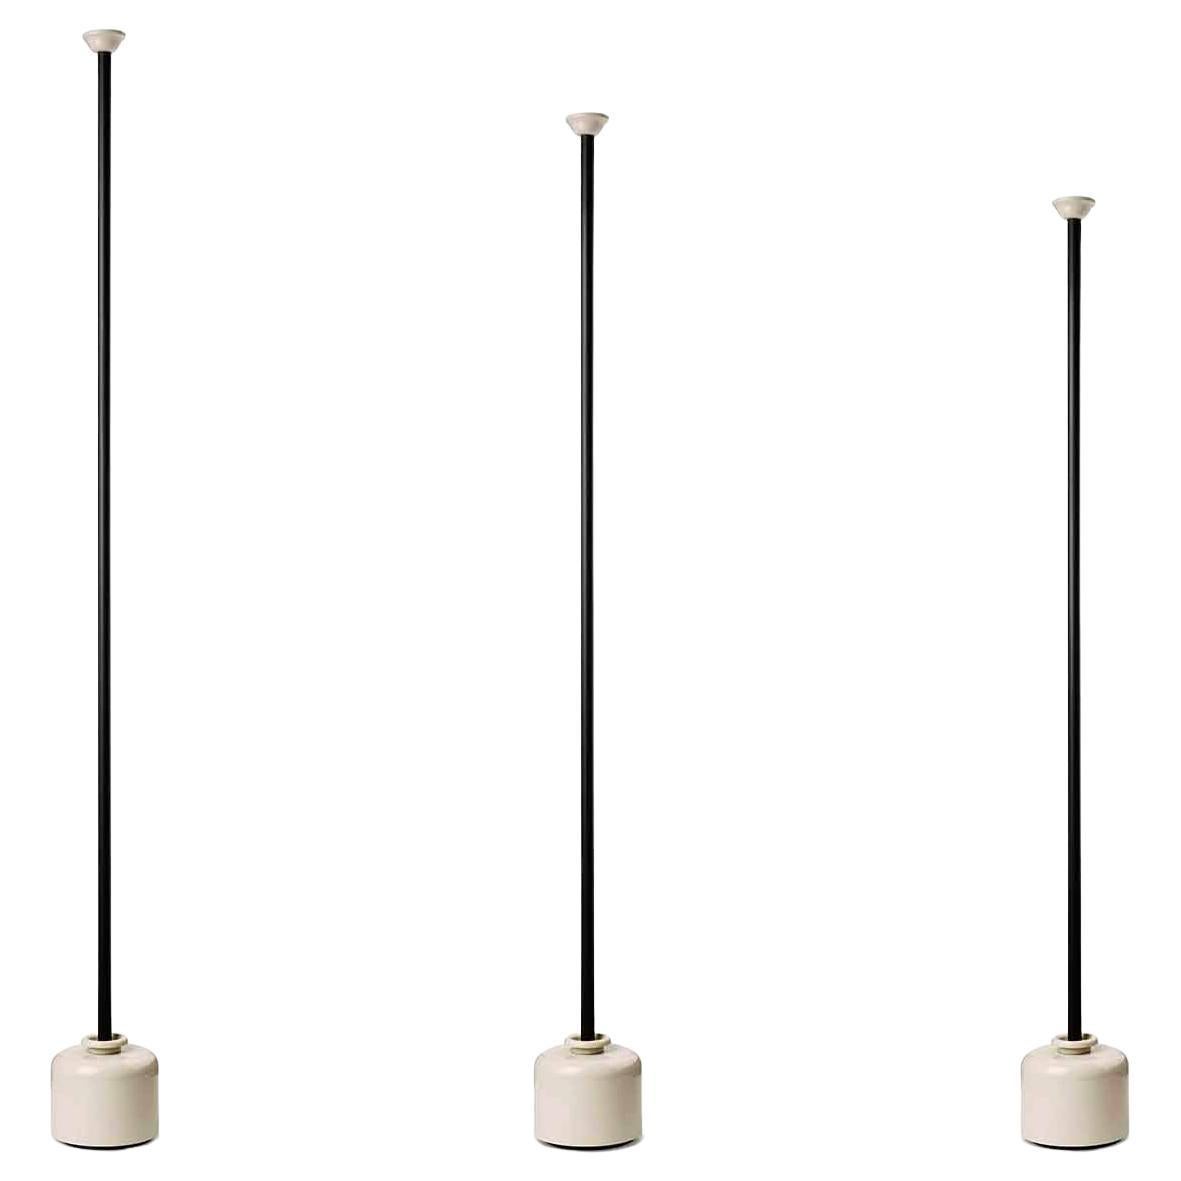 Set of 3 Gino Sarfatti Lamp Model 1095 "S-M-L" for Astep For Sale